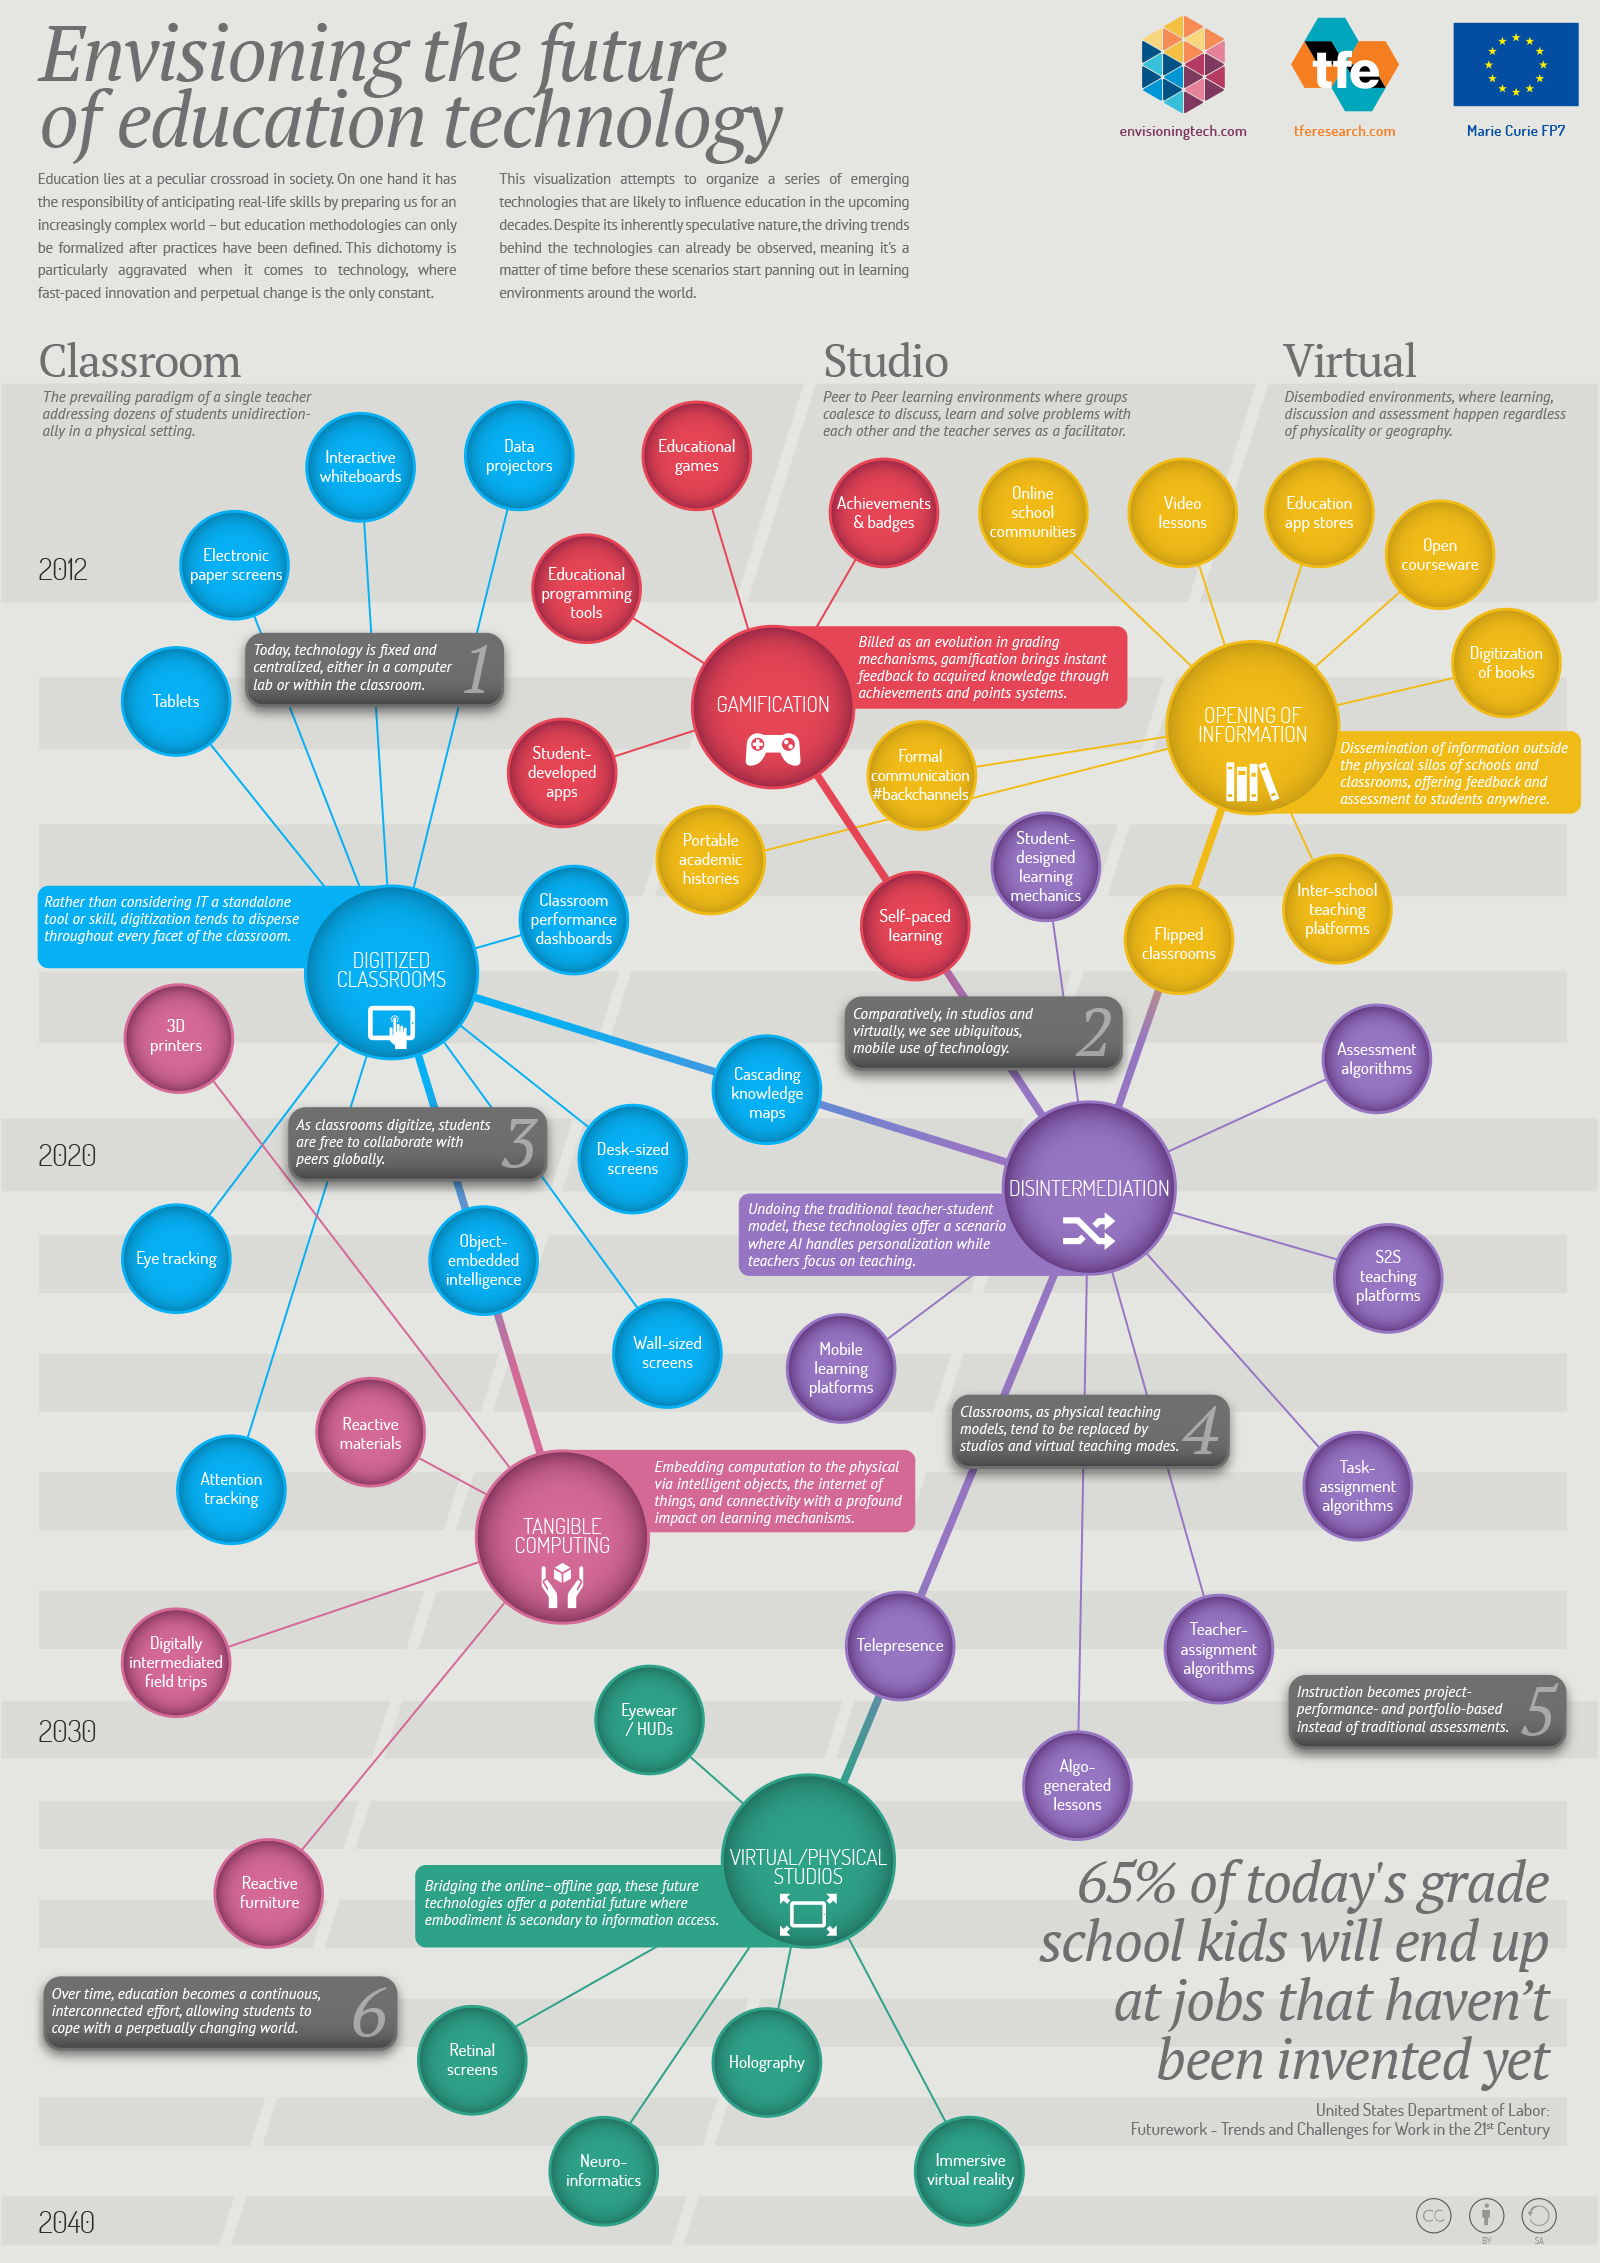 envisioning-the-future-of-education-technology_50291a3e6125d.png